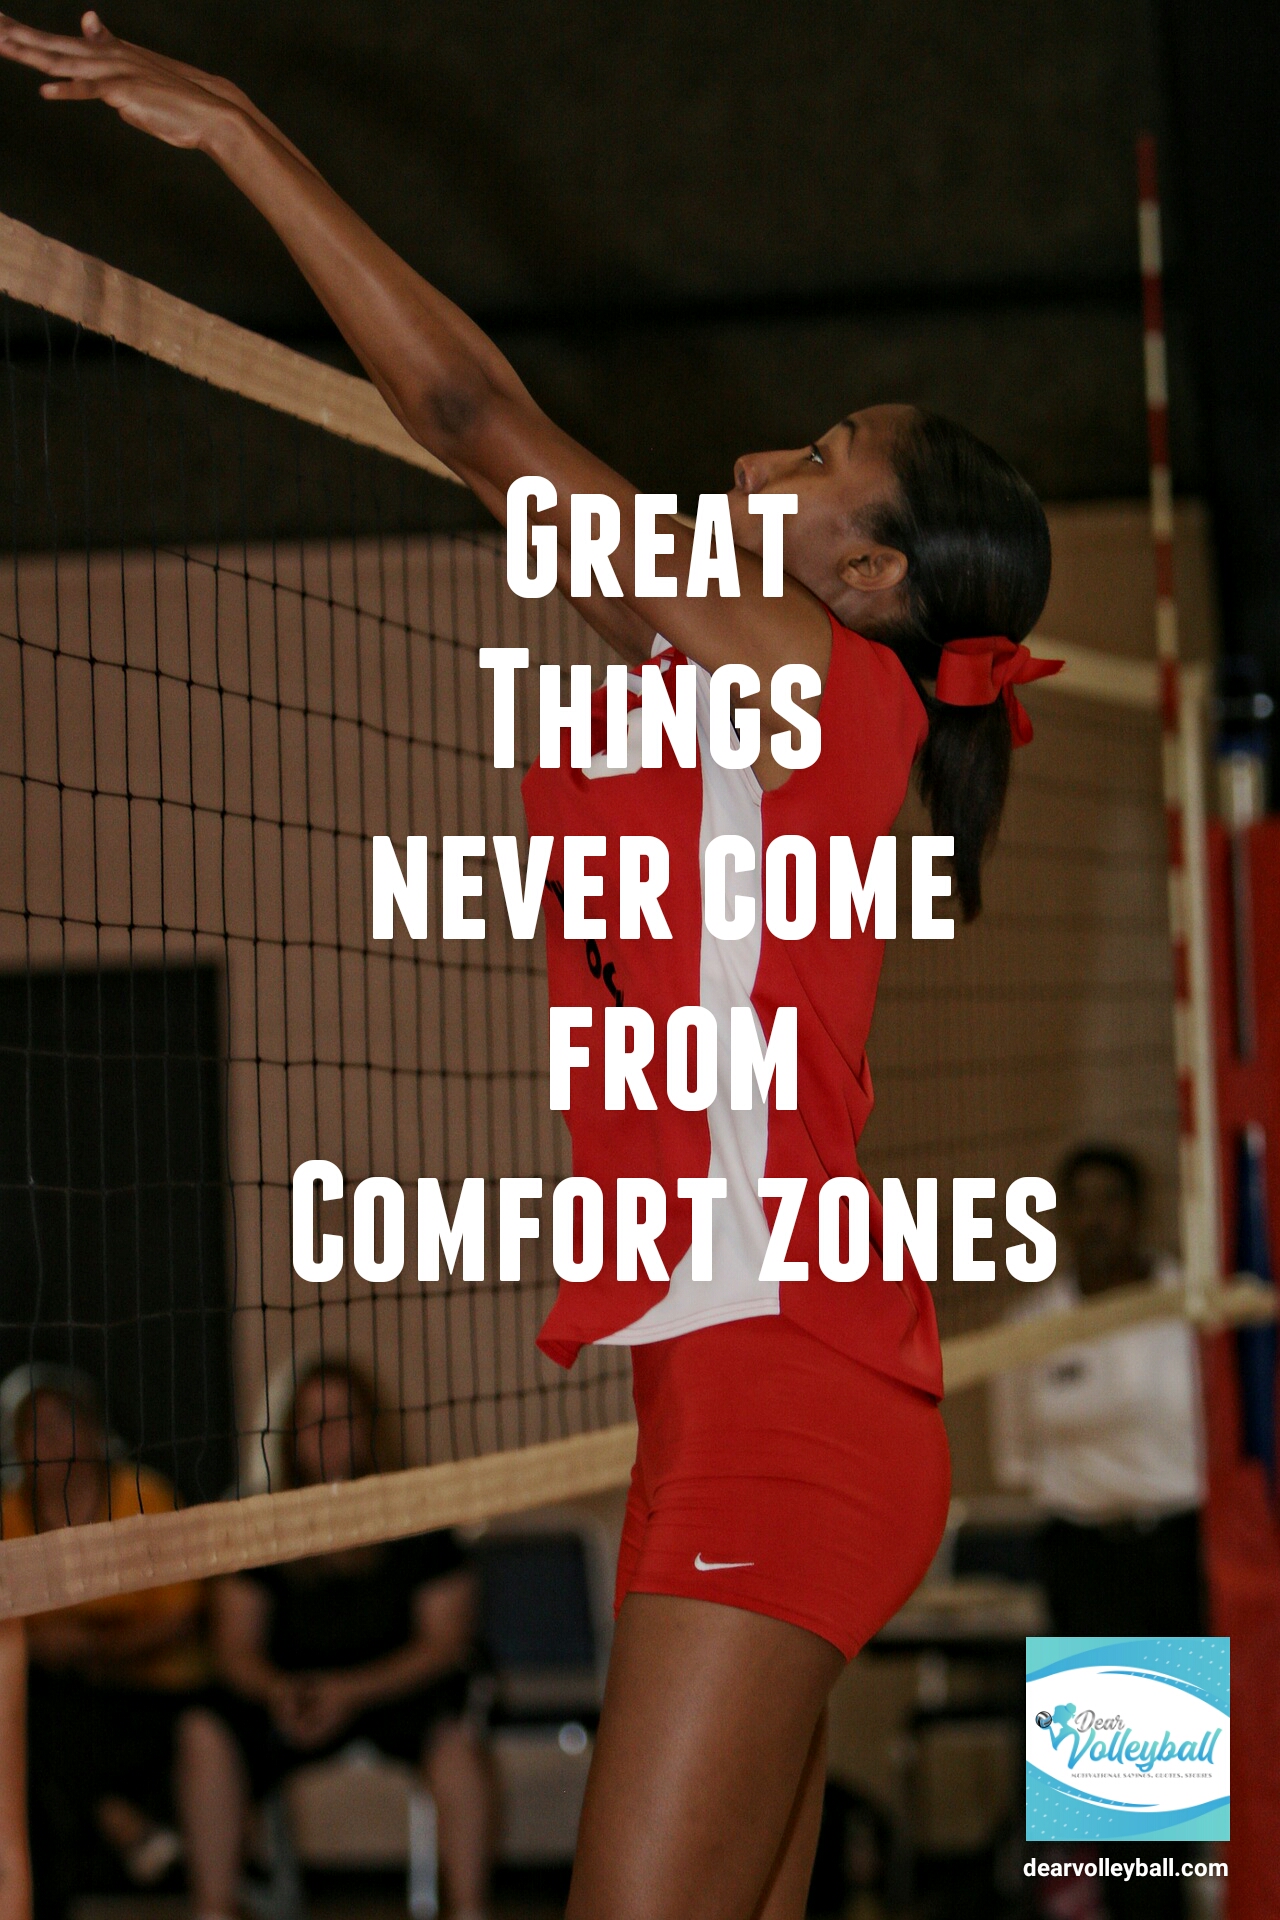 Great things never come from comfort zones and 54 short inspirational quotes on DearVolleyball.com